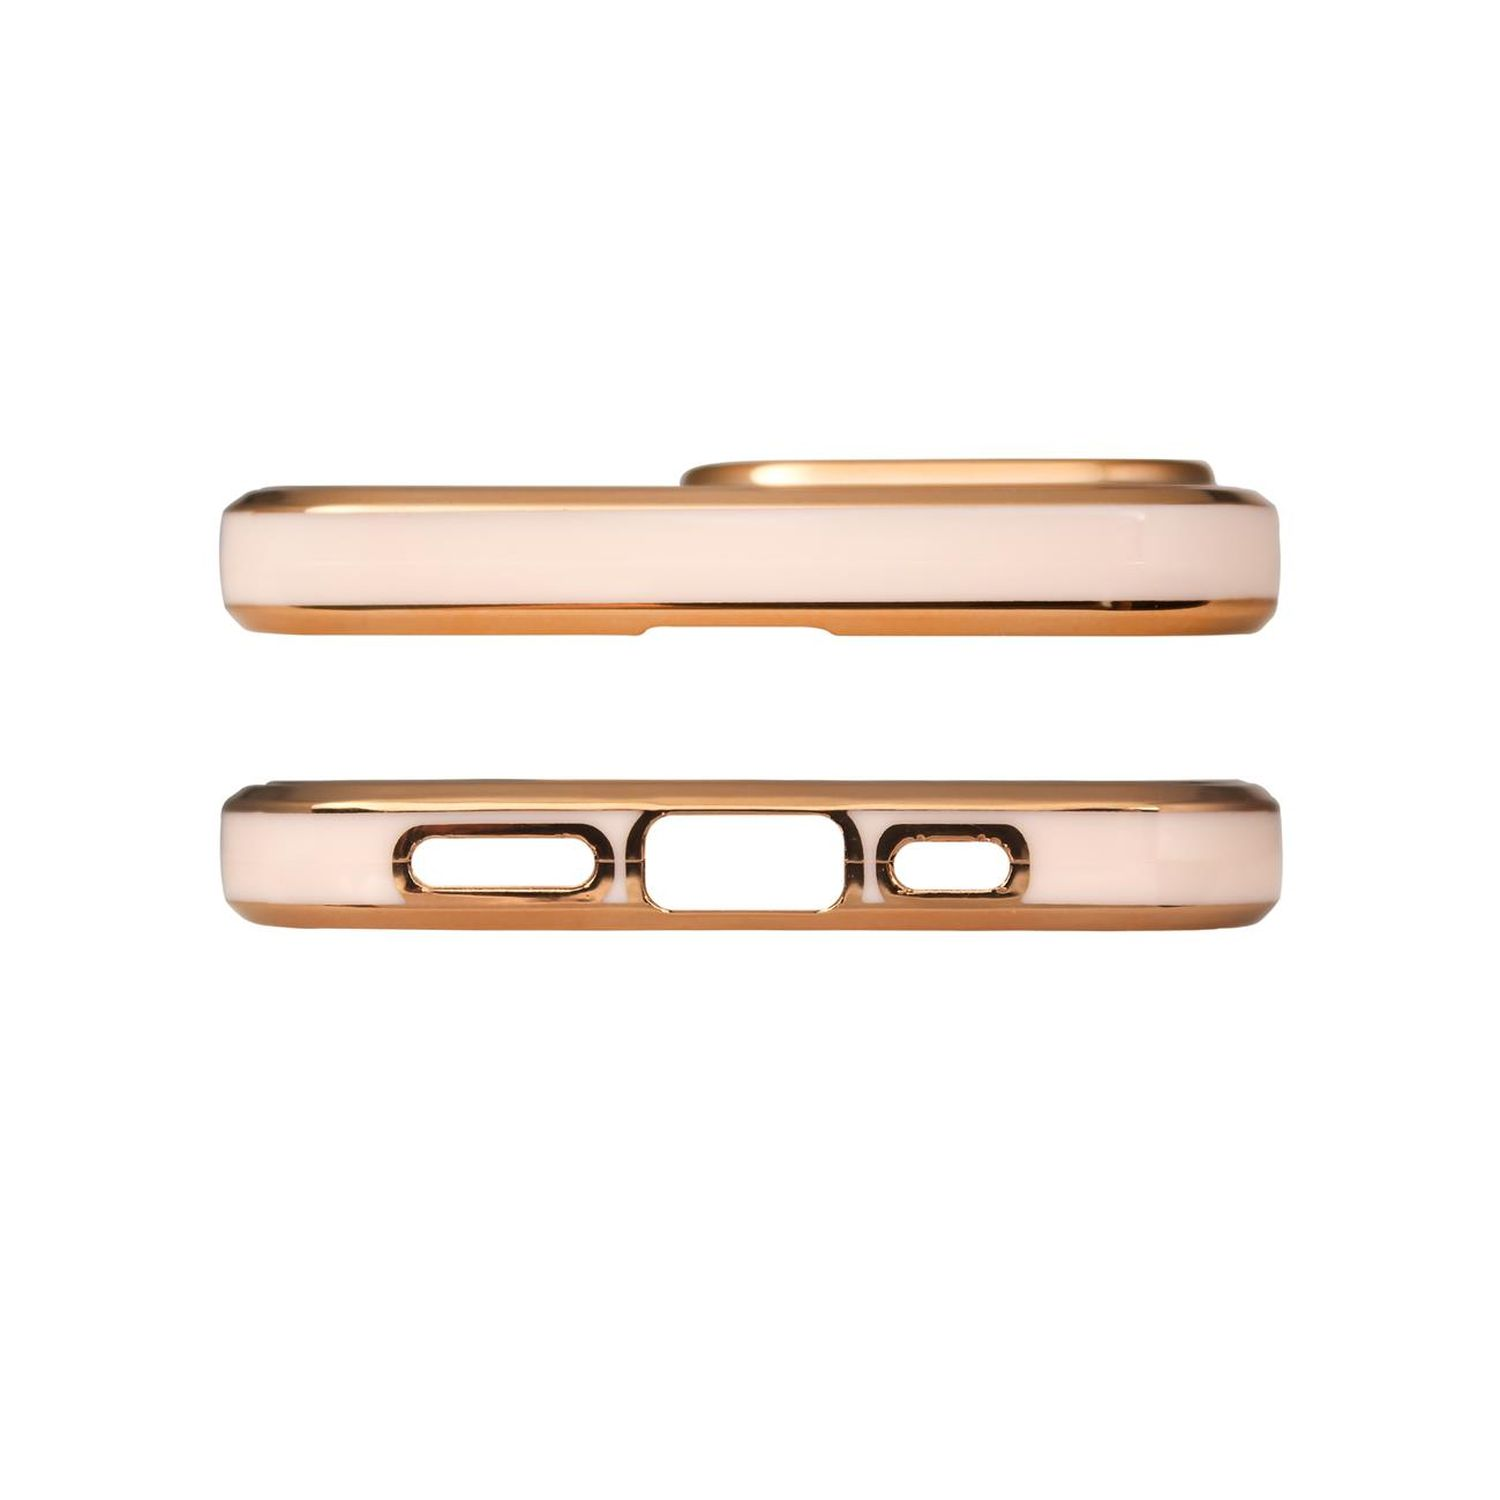 COFI Lighting 13 Pink-Gold Color Apple, Backcover, Pro, Case, iPhone